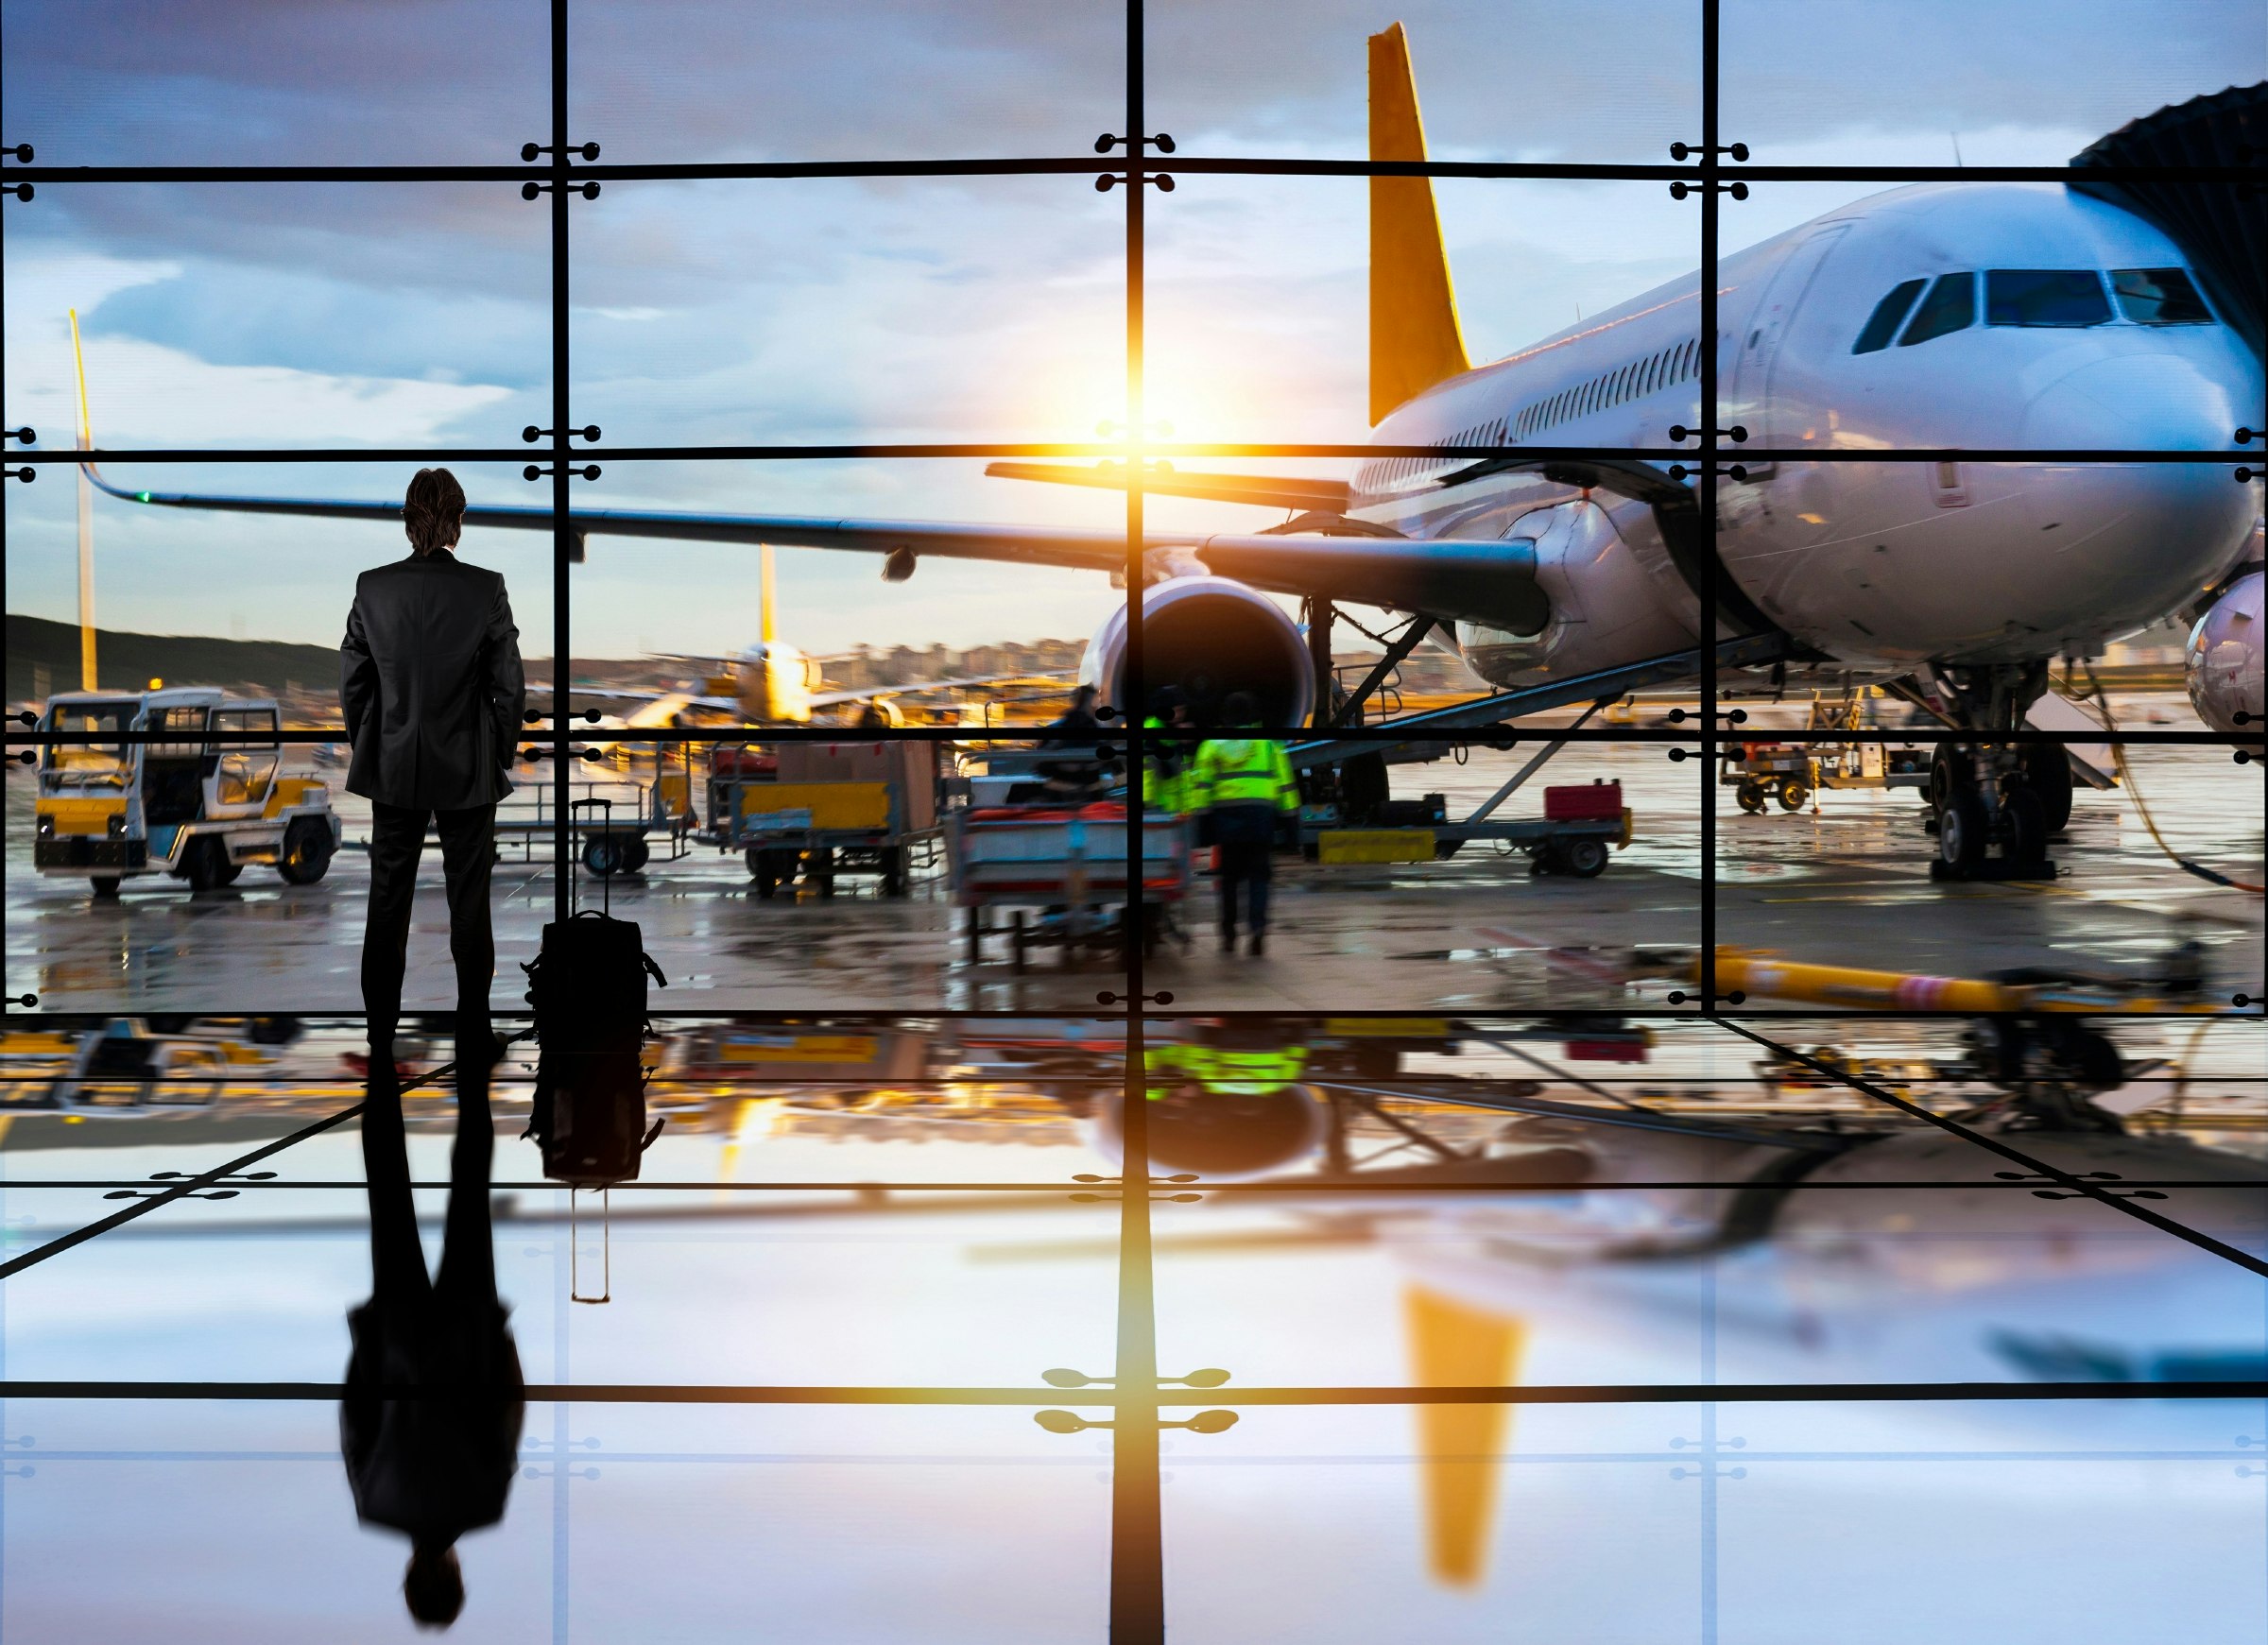 A man looks out at a plane in and airport